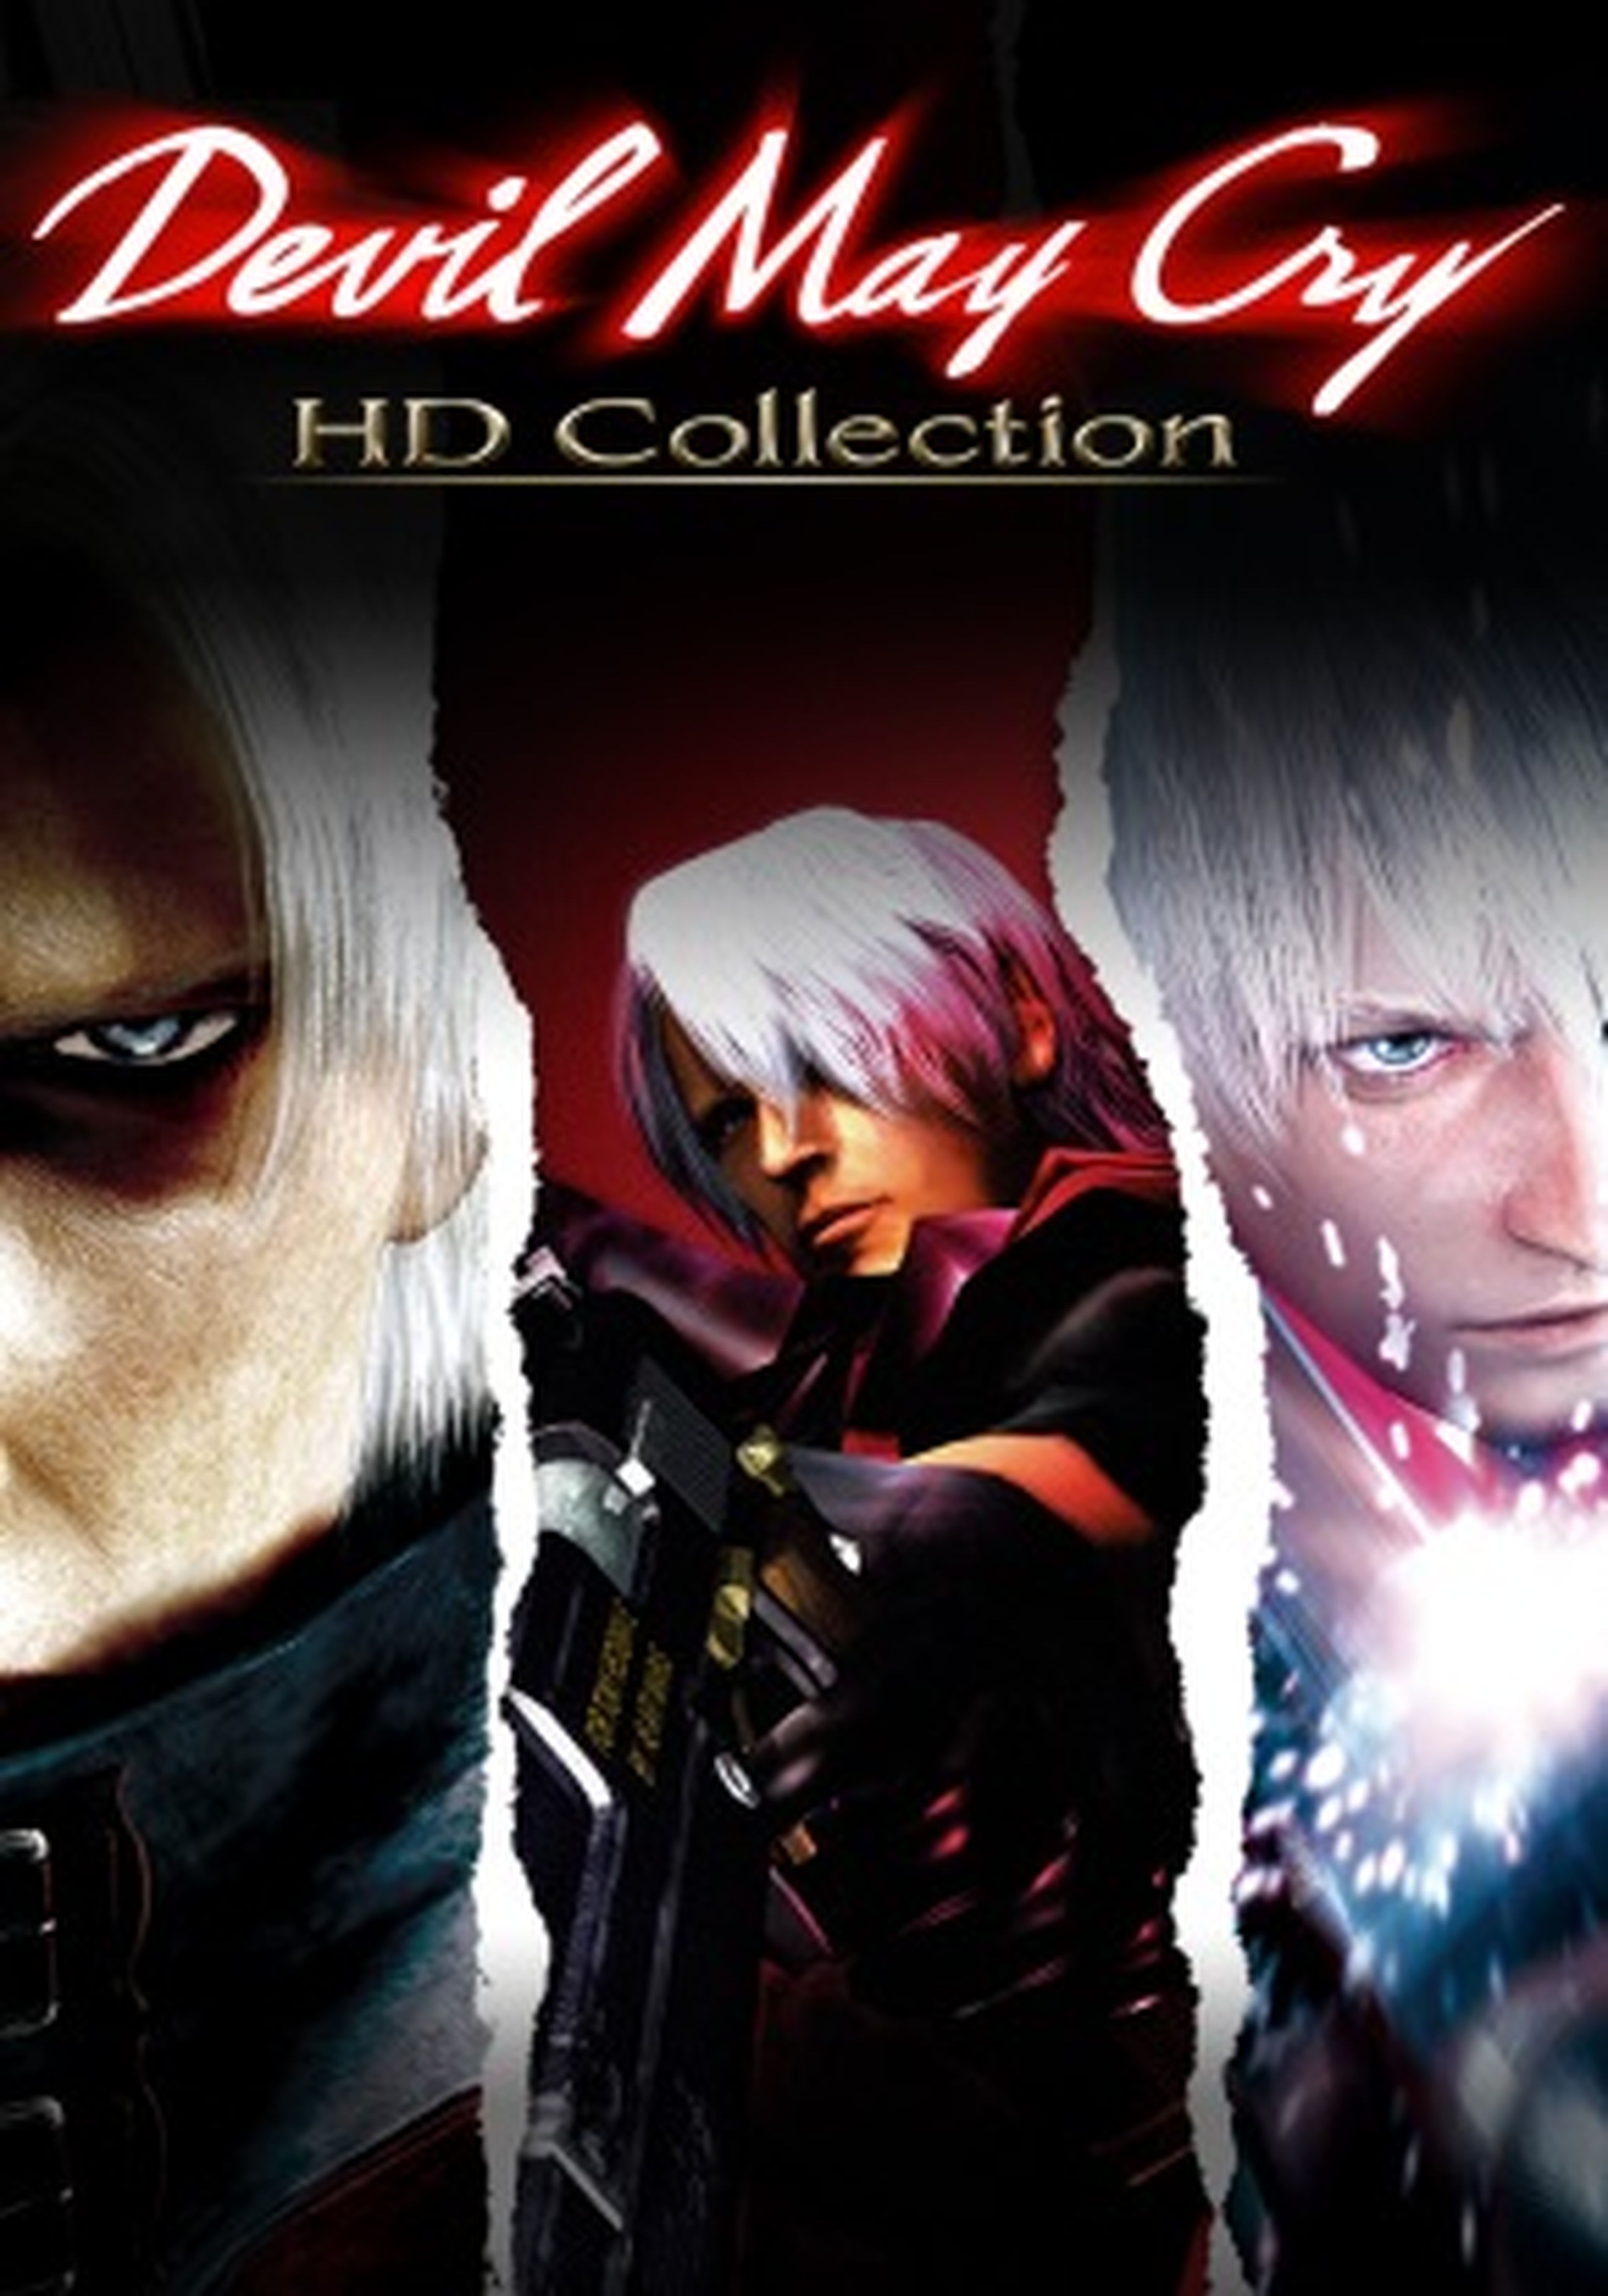 DMC HD Collection cover